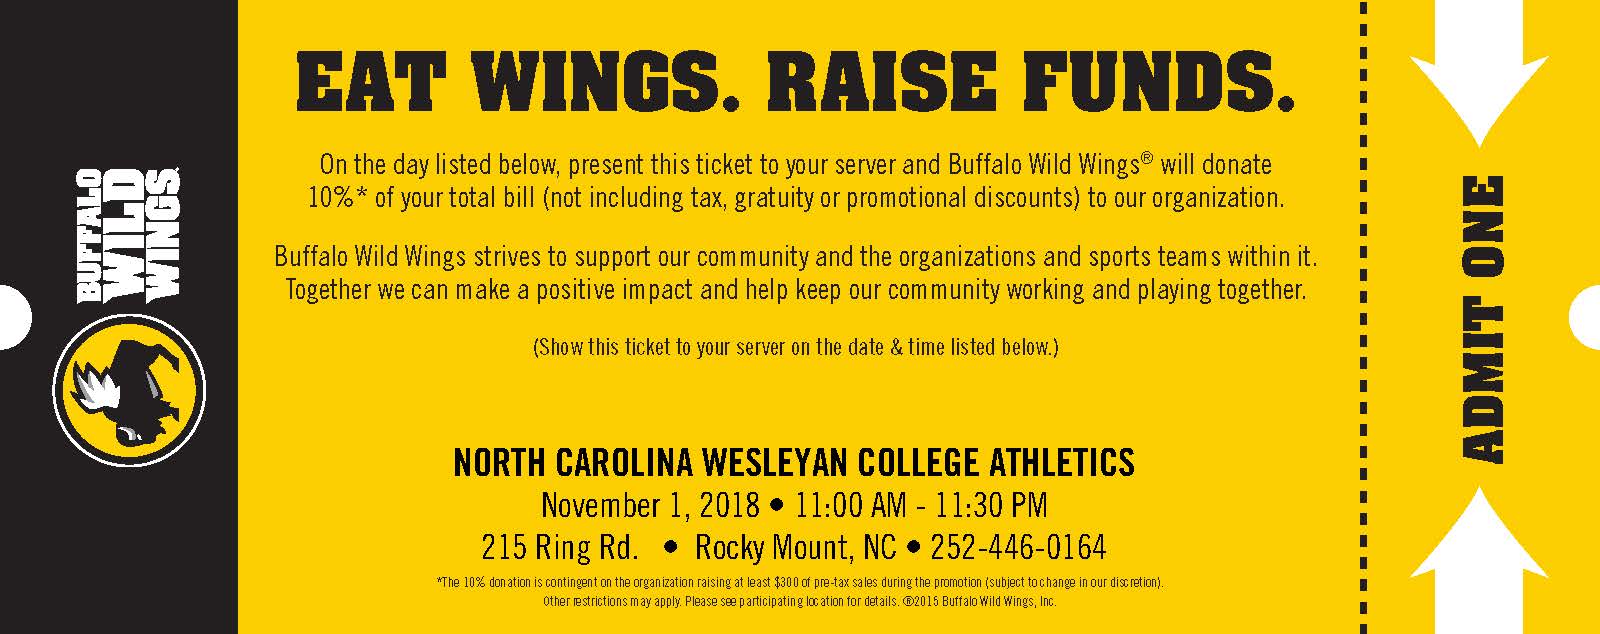 Buffalo Wild Wings Fundraiser for NCWC Today